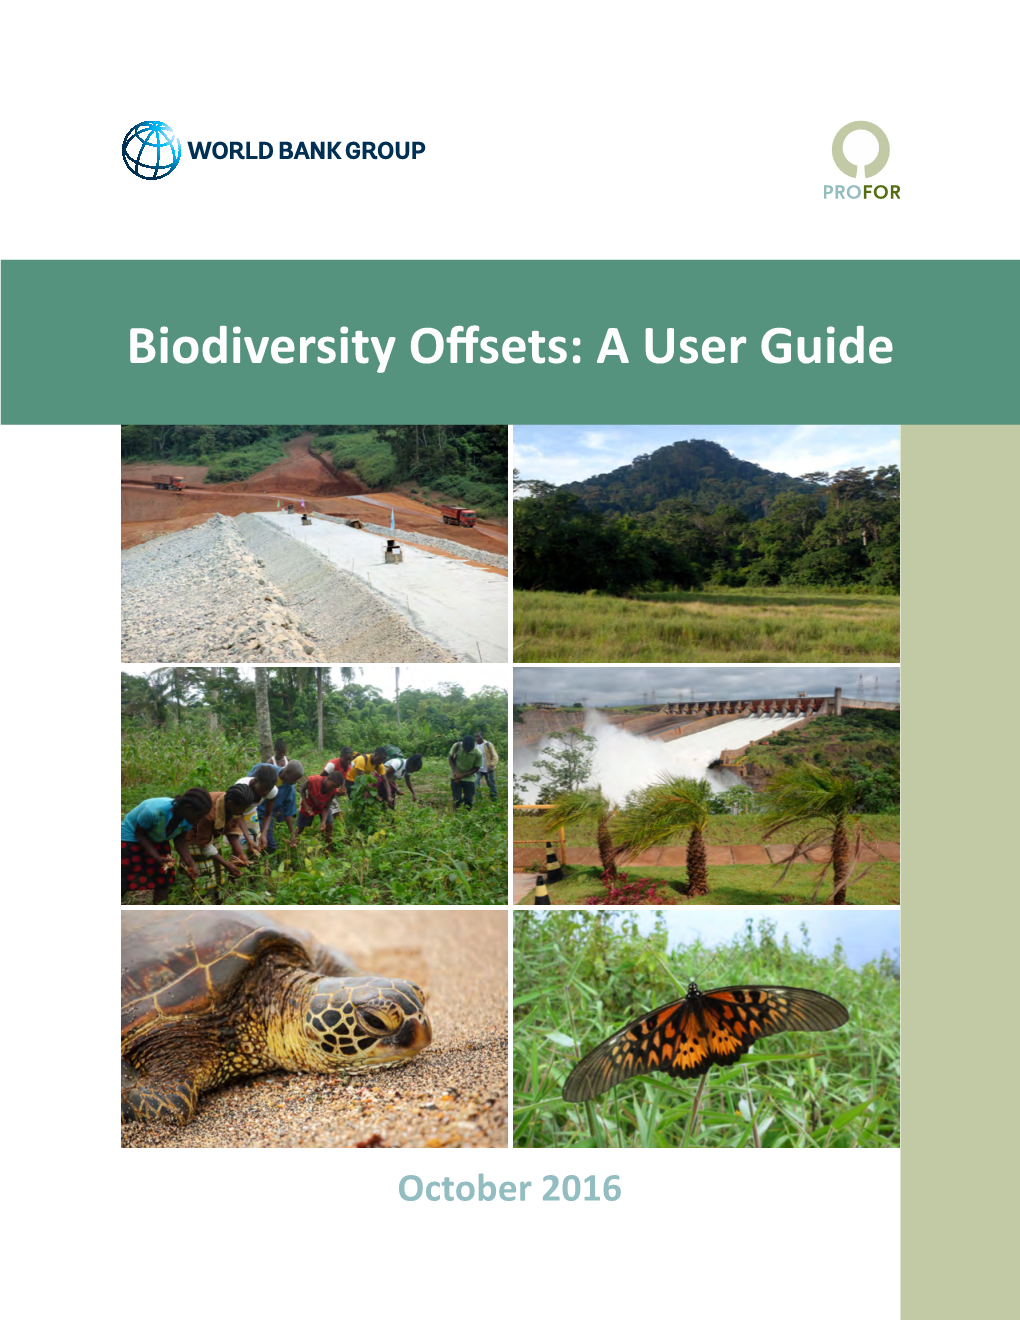 Biodiversity Offsets: a User Guide